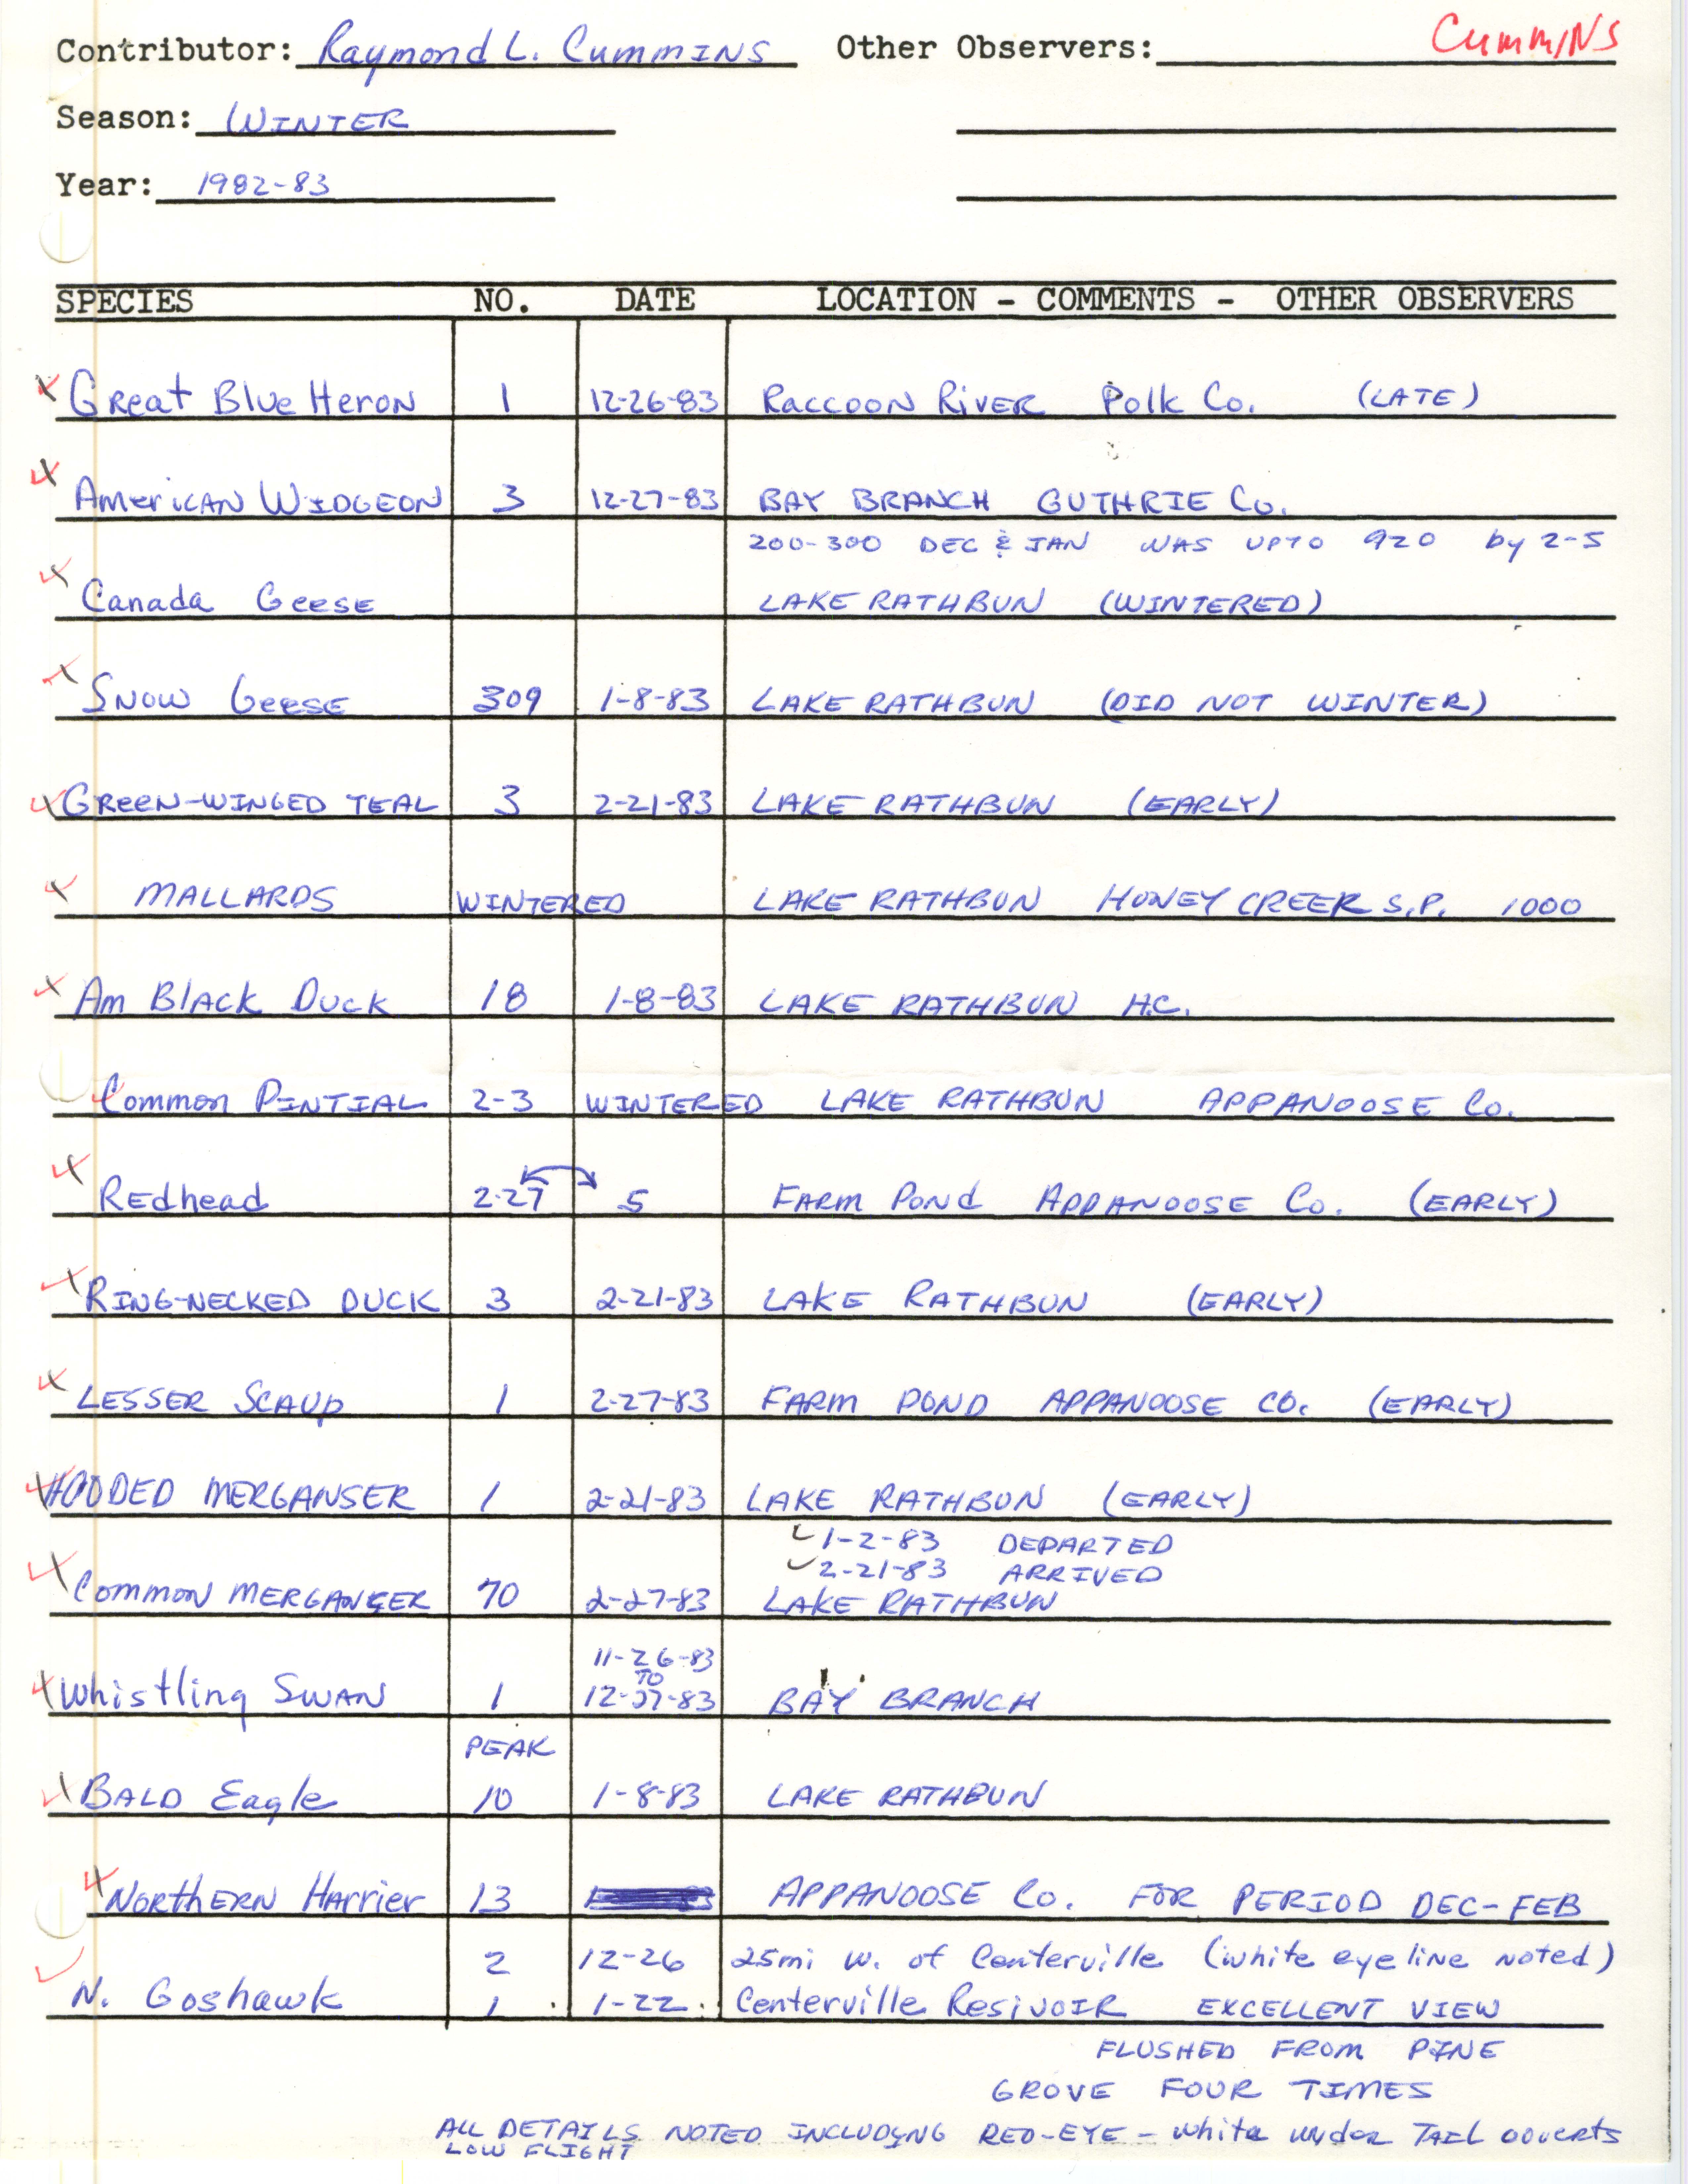 Field notes contributed by Raymond L. Cummins, February 27, 1983